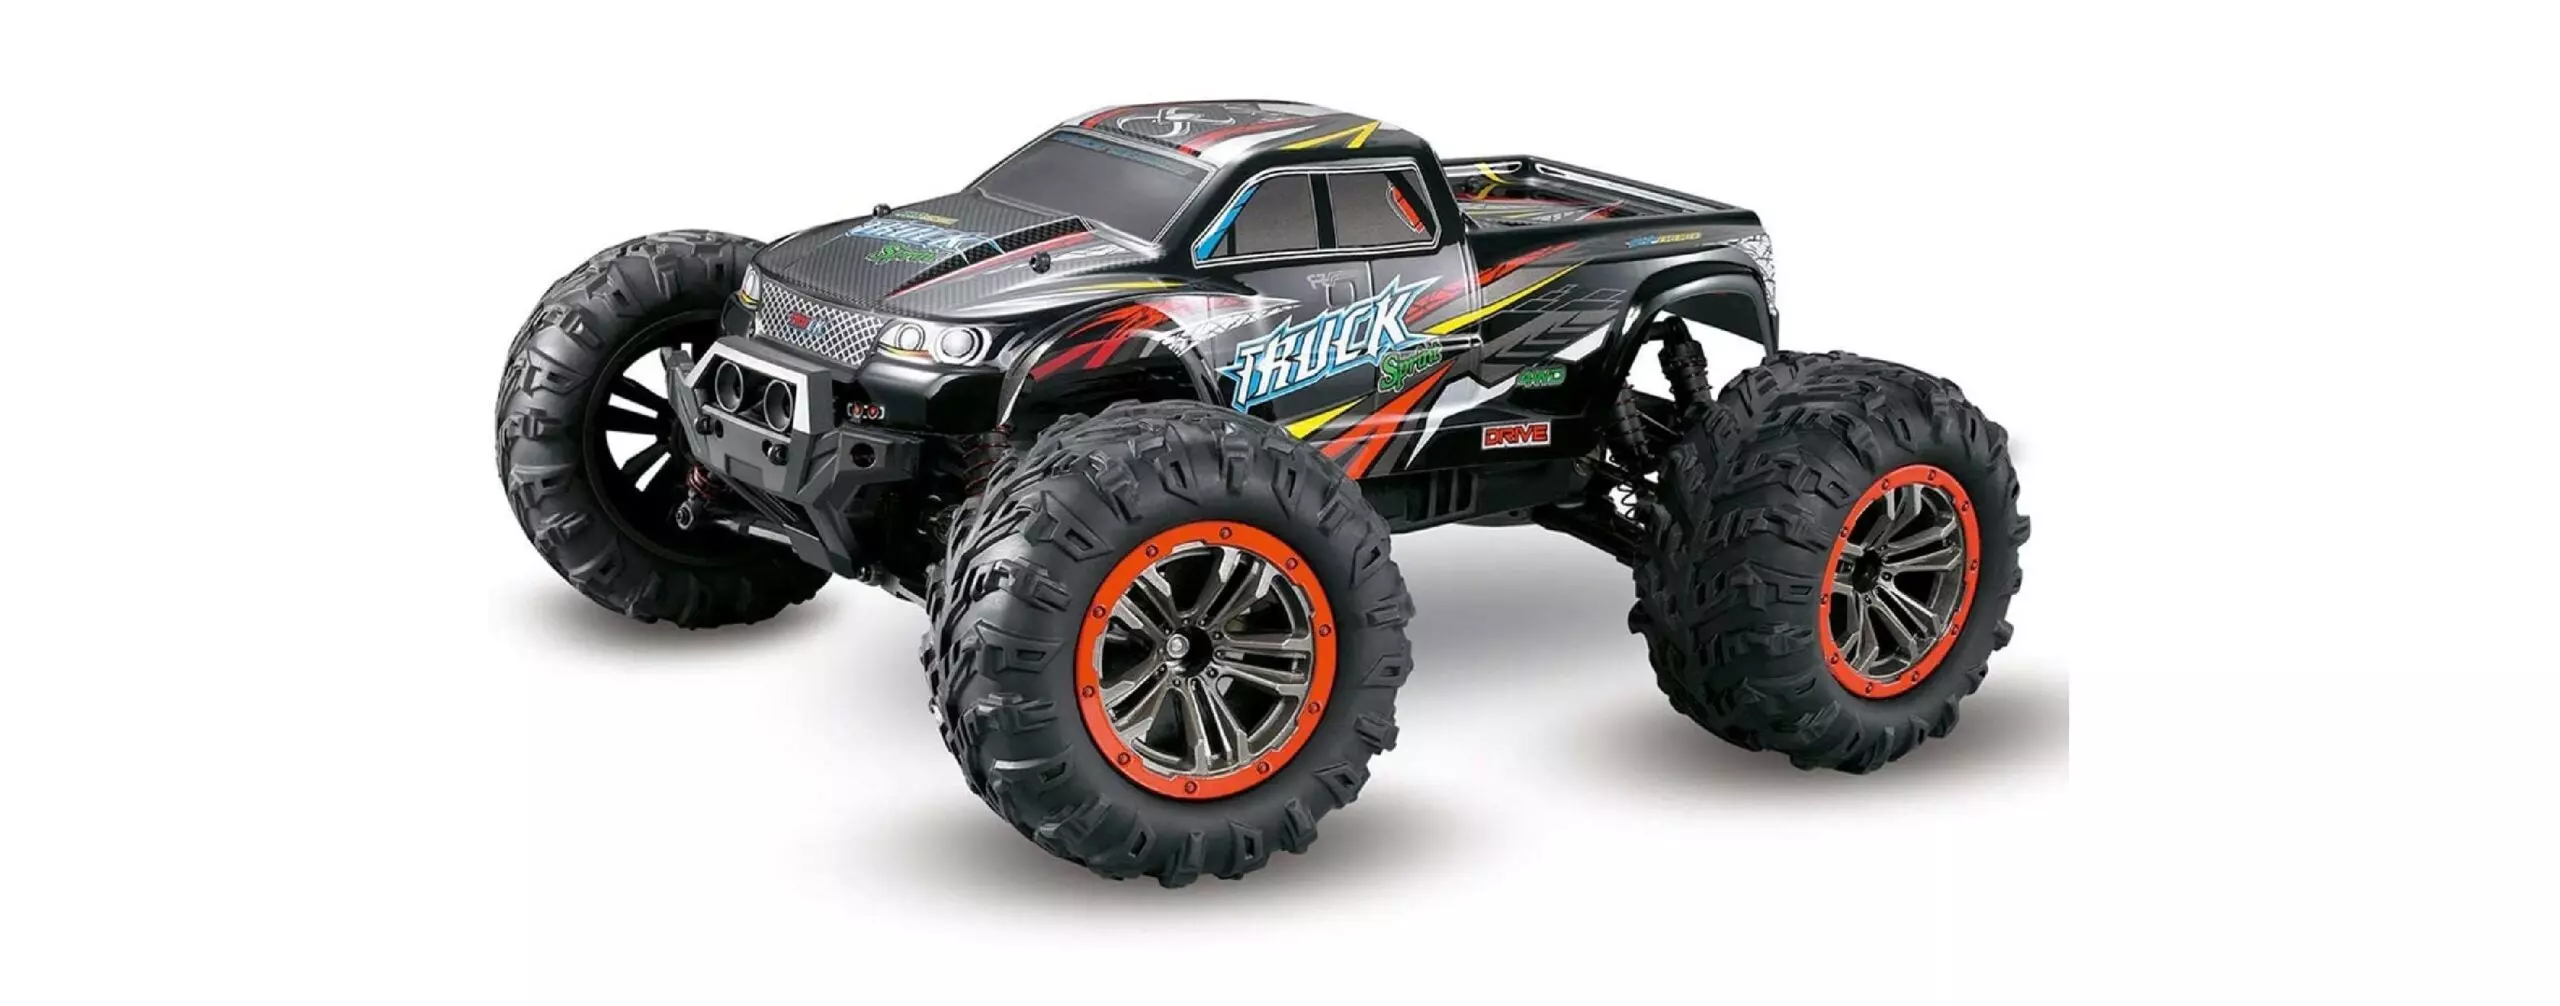 The Best RC Trucks (Review & Buying Guide) in 2022